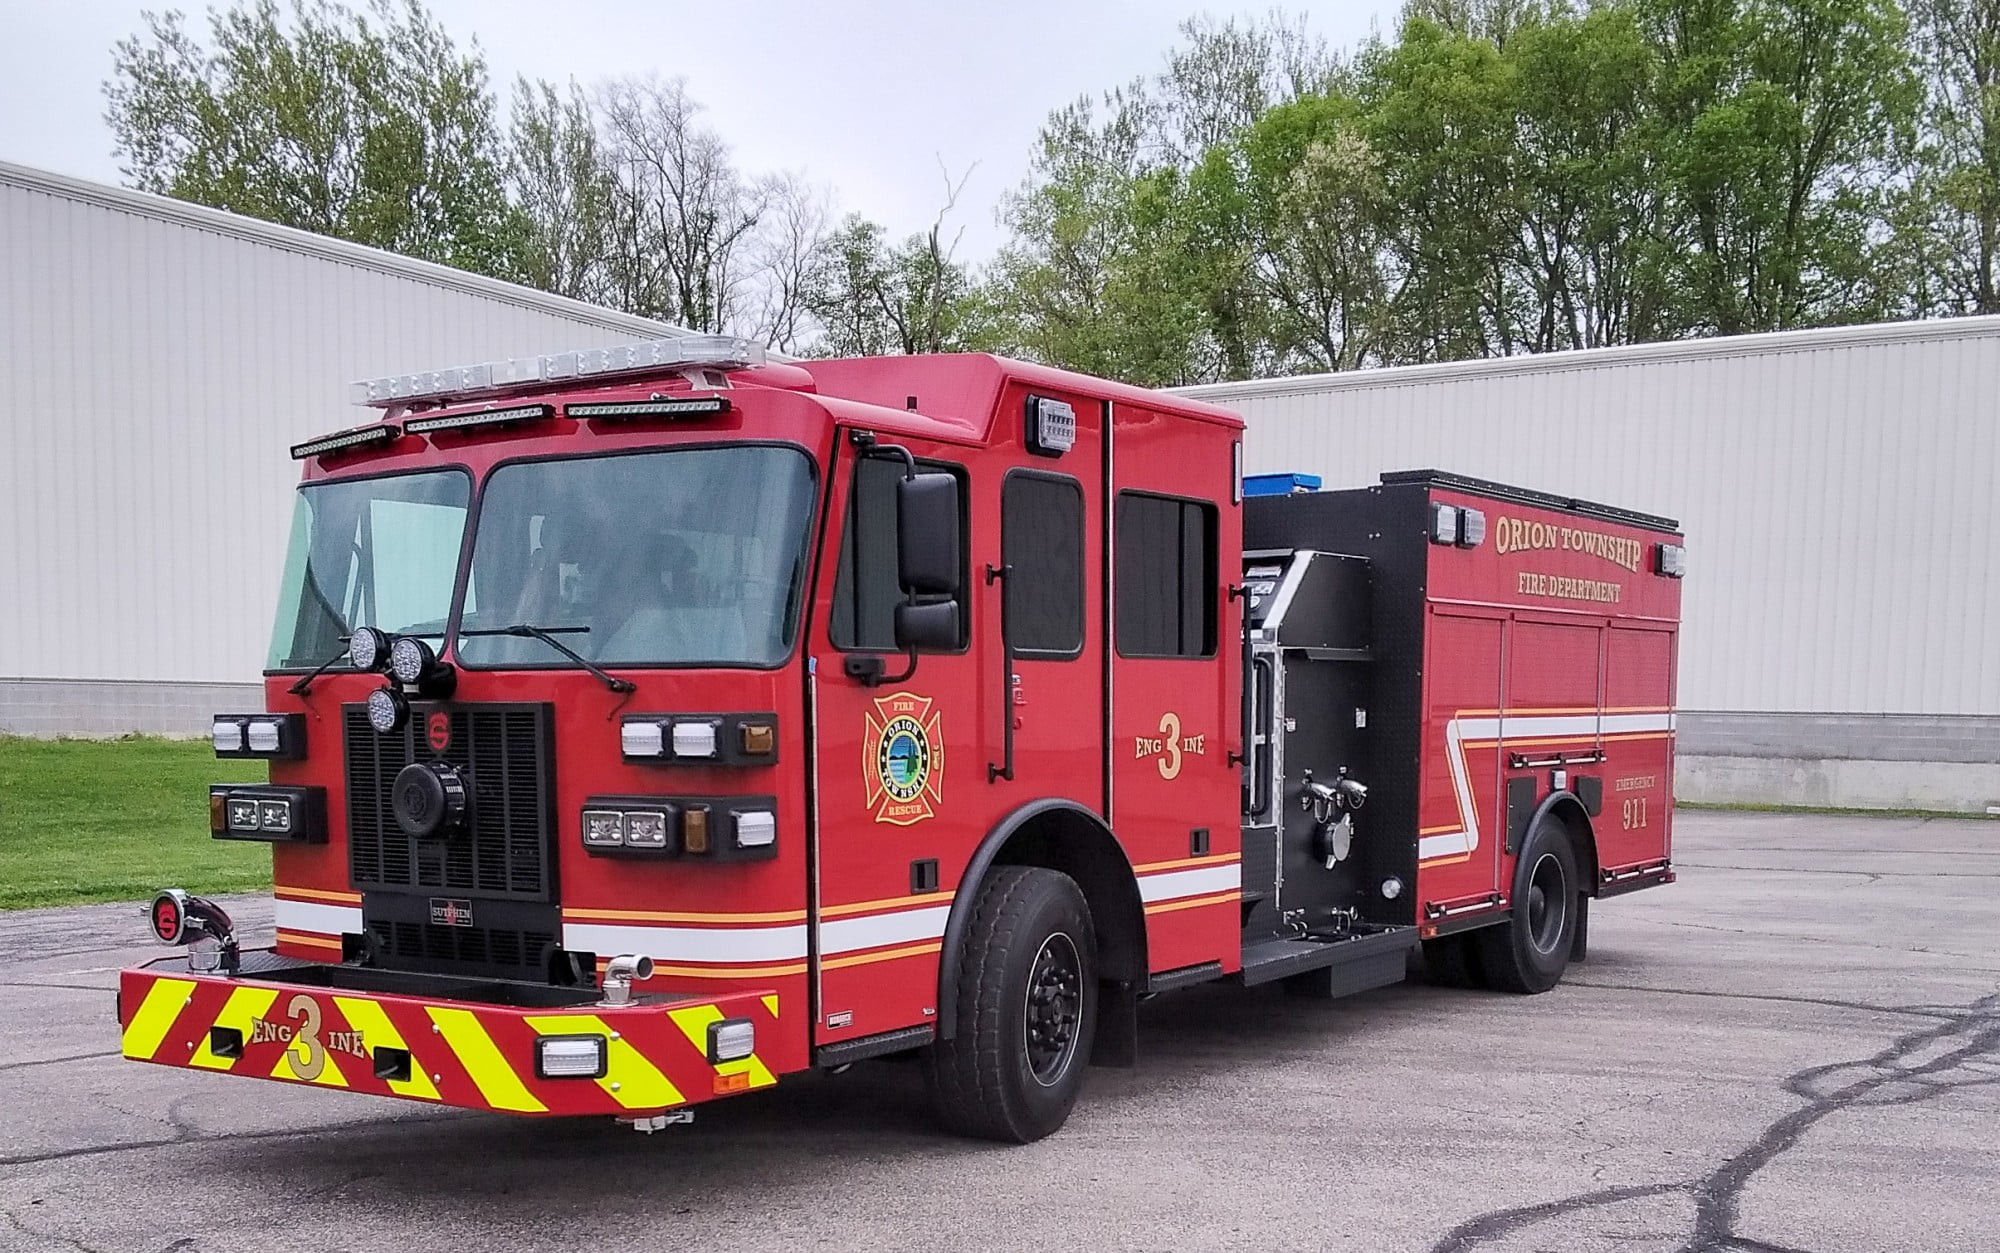 Orion Township Fire Department